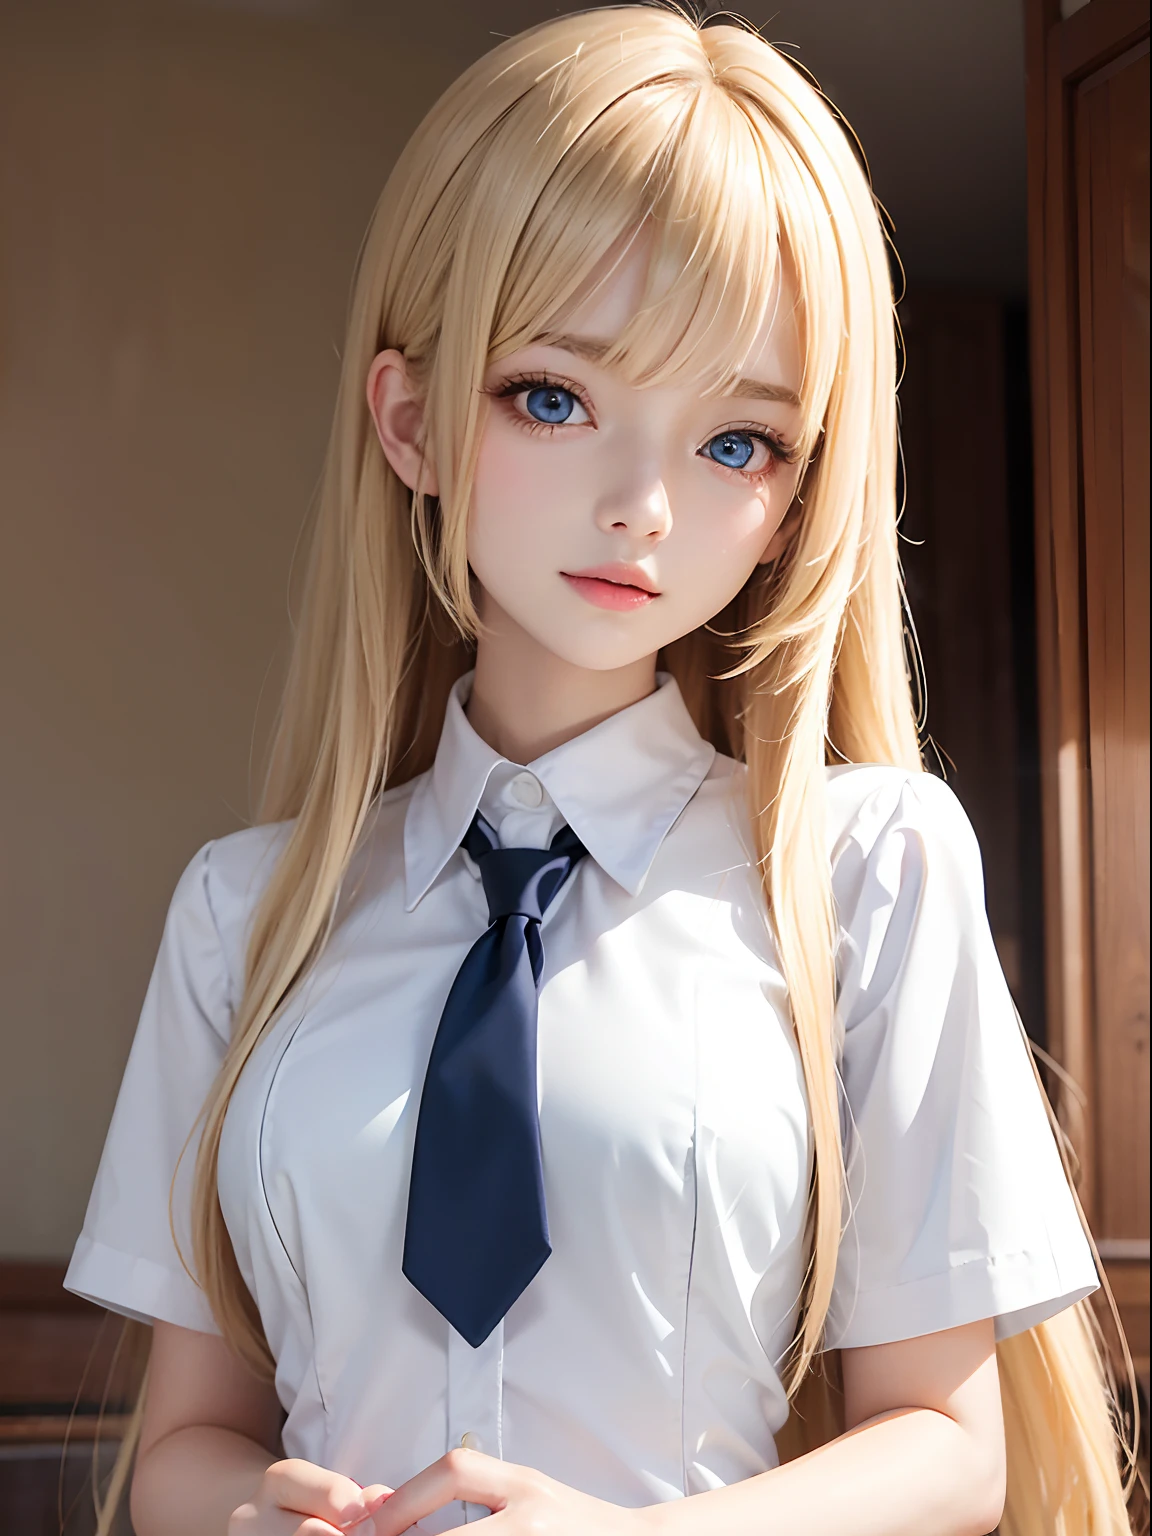 portlate、School Uniforms、bright expression、Young shiny shiny white shiny skin、Best Looks、ultimate beauty girl、The most beautiful blonde hair in the world、shiny light hair,、Super long silky straight hair、Beautiful bangs that shine、Glowing crystal clear attractive blue eyes、Very beautiful nice cute 16 year old girl、Lush bust